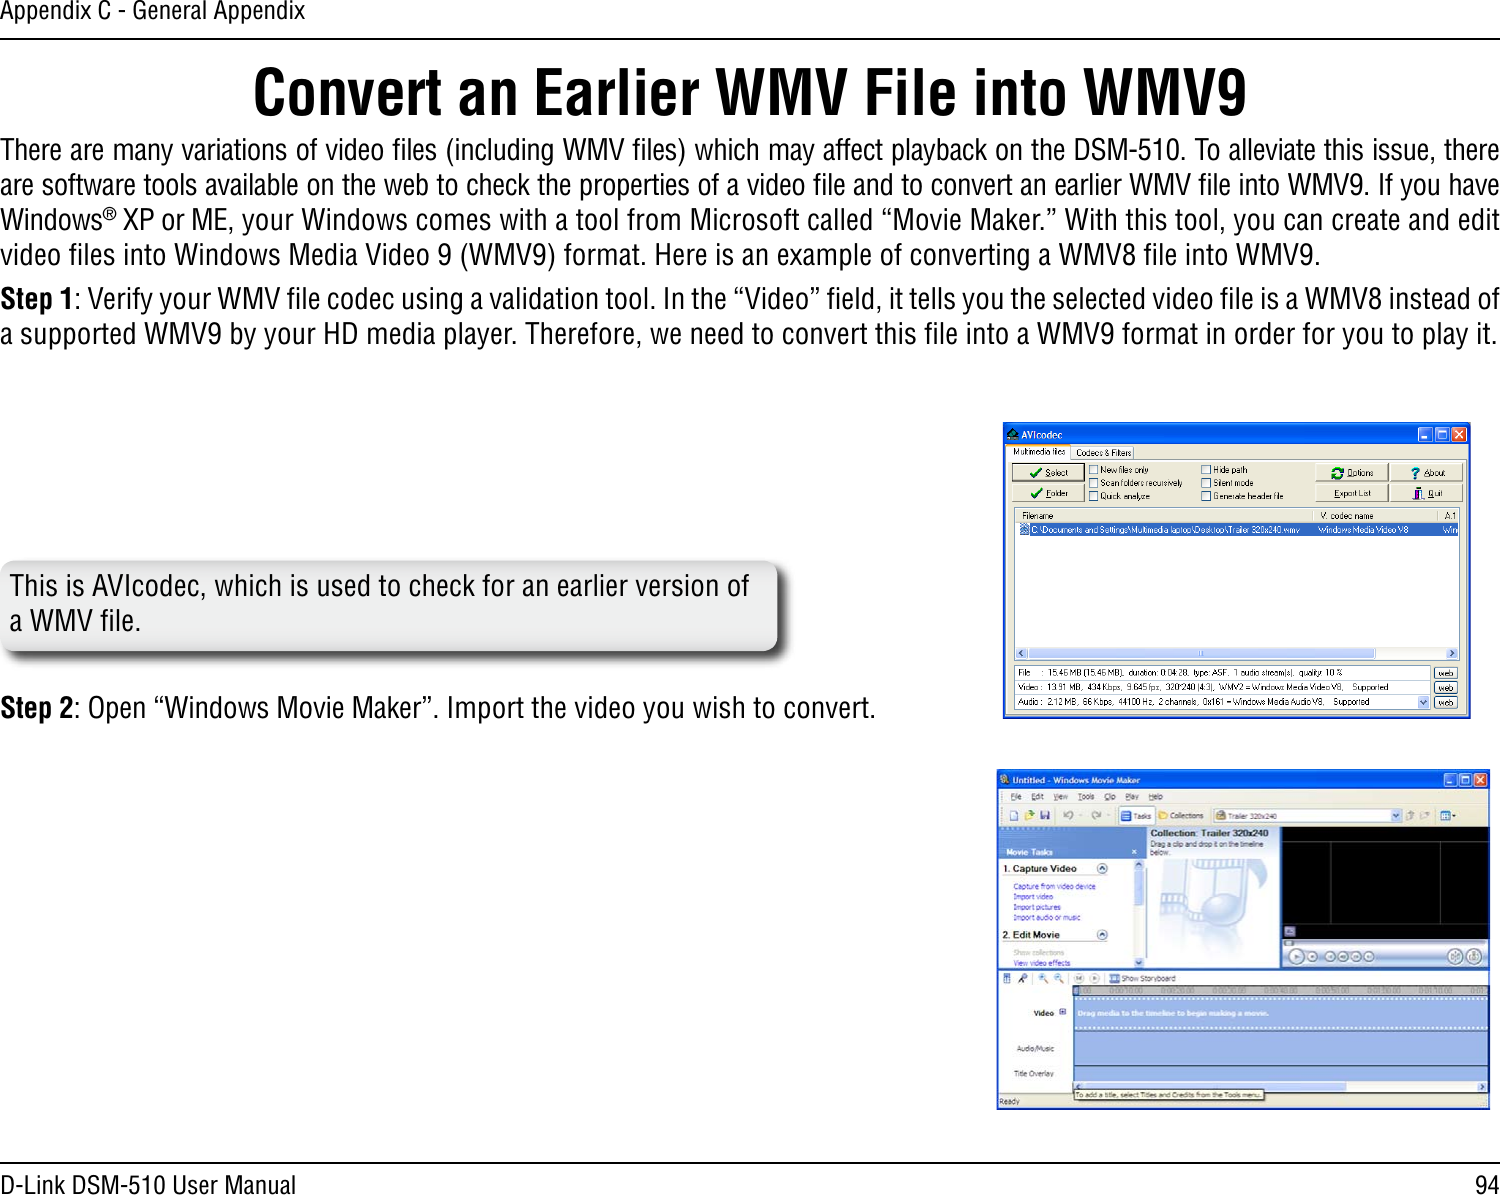 94D-Link DSM-510 User ManualAppendix C - General AppendixConvert an Earlier WMV File into WMV9 There are many variations of video ﬁles (including WMV ﬁles) which may affect playback on the DSM-510. To alleviate this issue, there are software tools available on the web to check the properties of a video ﬁle and to convert an earlier WMV ﬁle into WMV9. If you have Windows® XP or ME, your Windows comes with a tool from Microsoft called “Movie Maker.” With this tool, you can create and edit video ﬁles into Windows Media Video 9 (WMV9) format. Here is an example of converting a WMV8 ﬁle into WMV9.Step 1: Verify your WMV ﬁle codec using a validation tool. In the “Video” ﬁeld, it tells you the selected video ﬁle is a WMV8 instead of a supported WMV9 by your HD media player. Therefore, we need to convert this ﬁle into a WMV9 format in order for you to play it.Step 2: Open “Windows Movie Maker”. Import the video you wish to convert. This is AVIcodec, which is used to check for an earlier version of a WMV ﬁle.